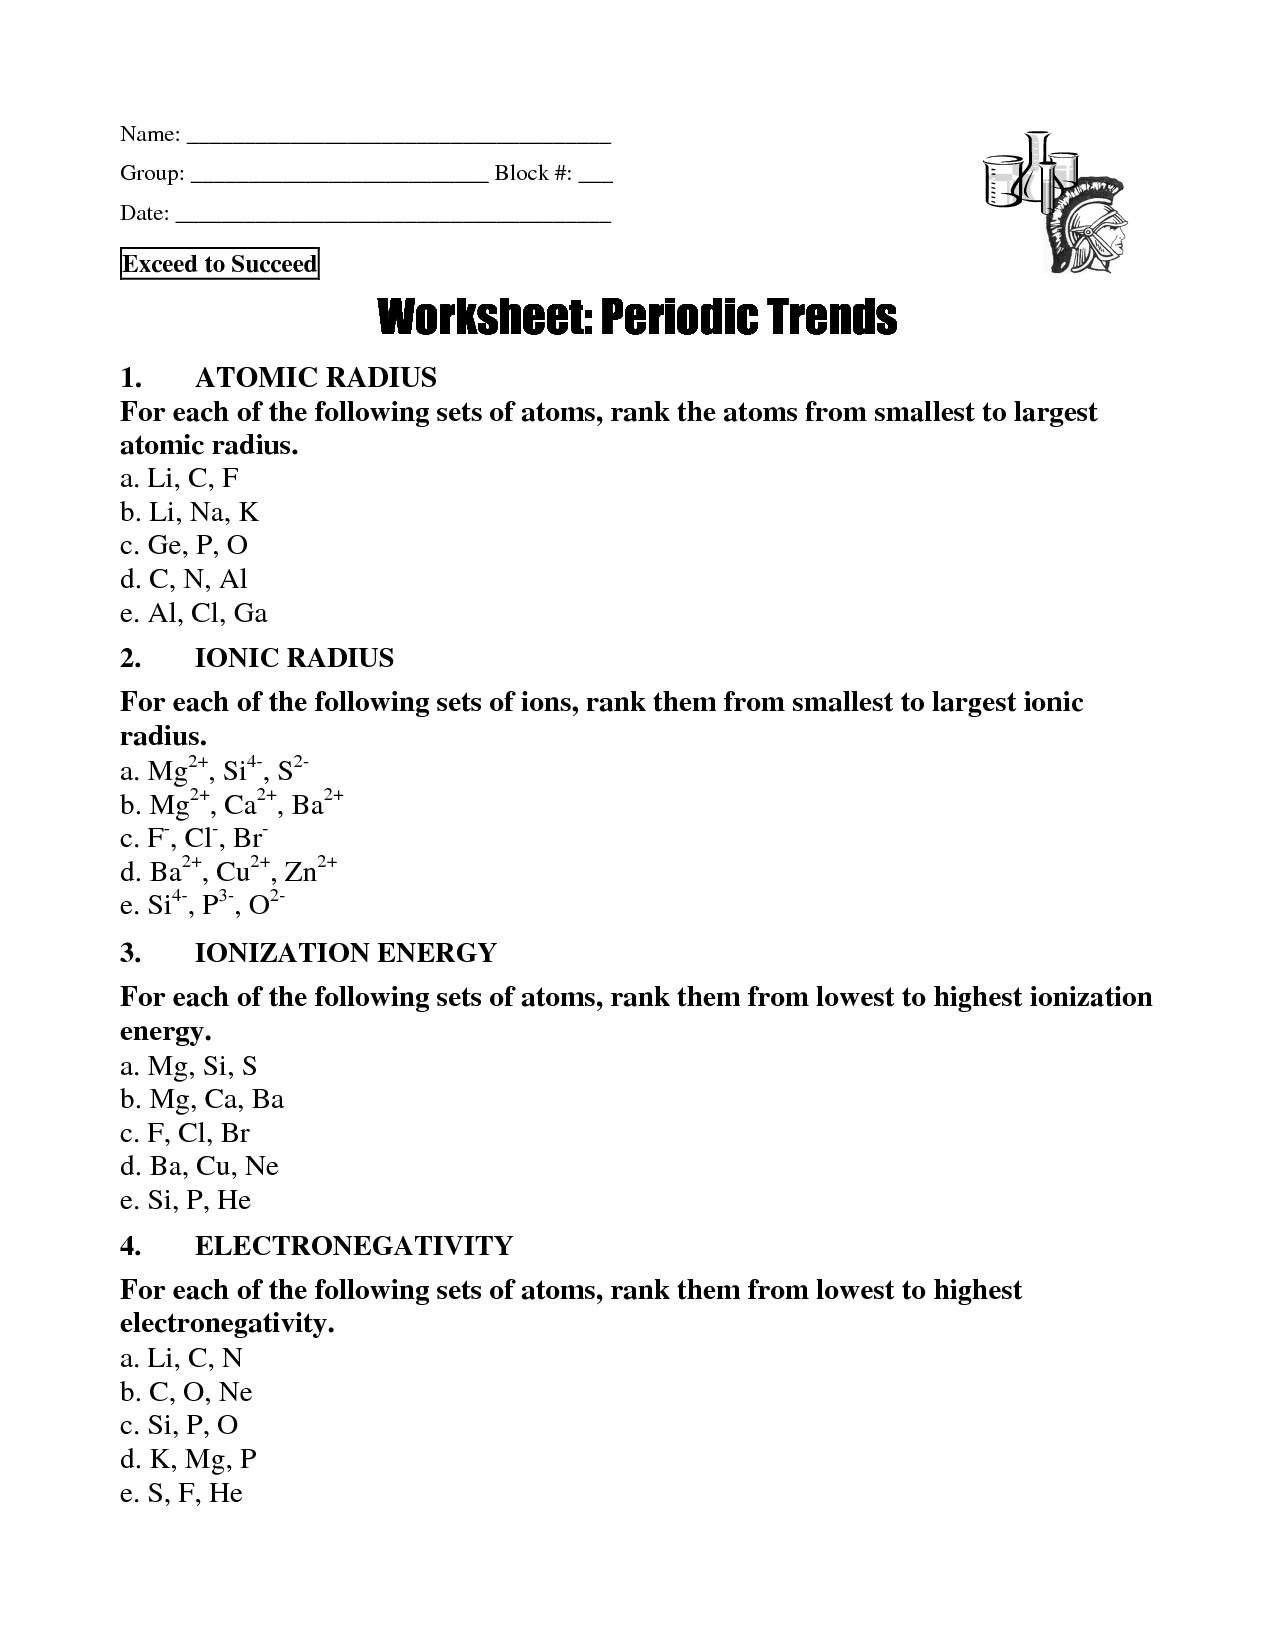 Worksheet Periodic Trends Answers Periodic Table Mars Worksheet